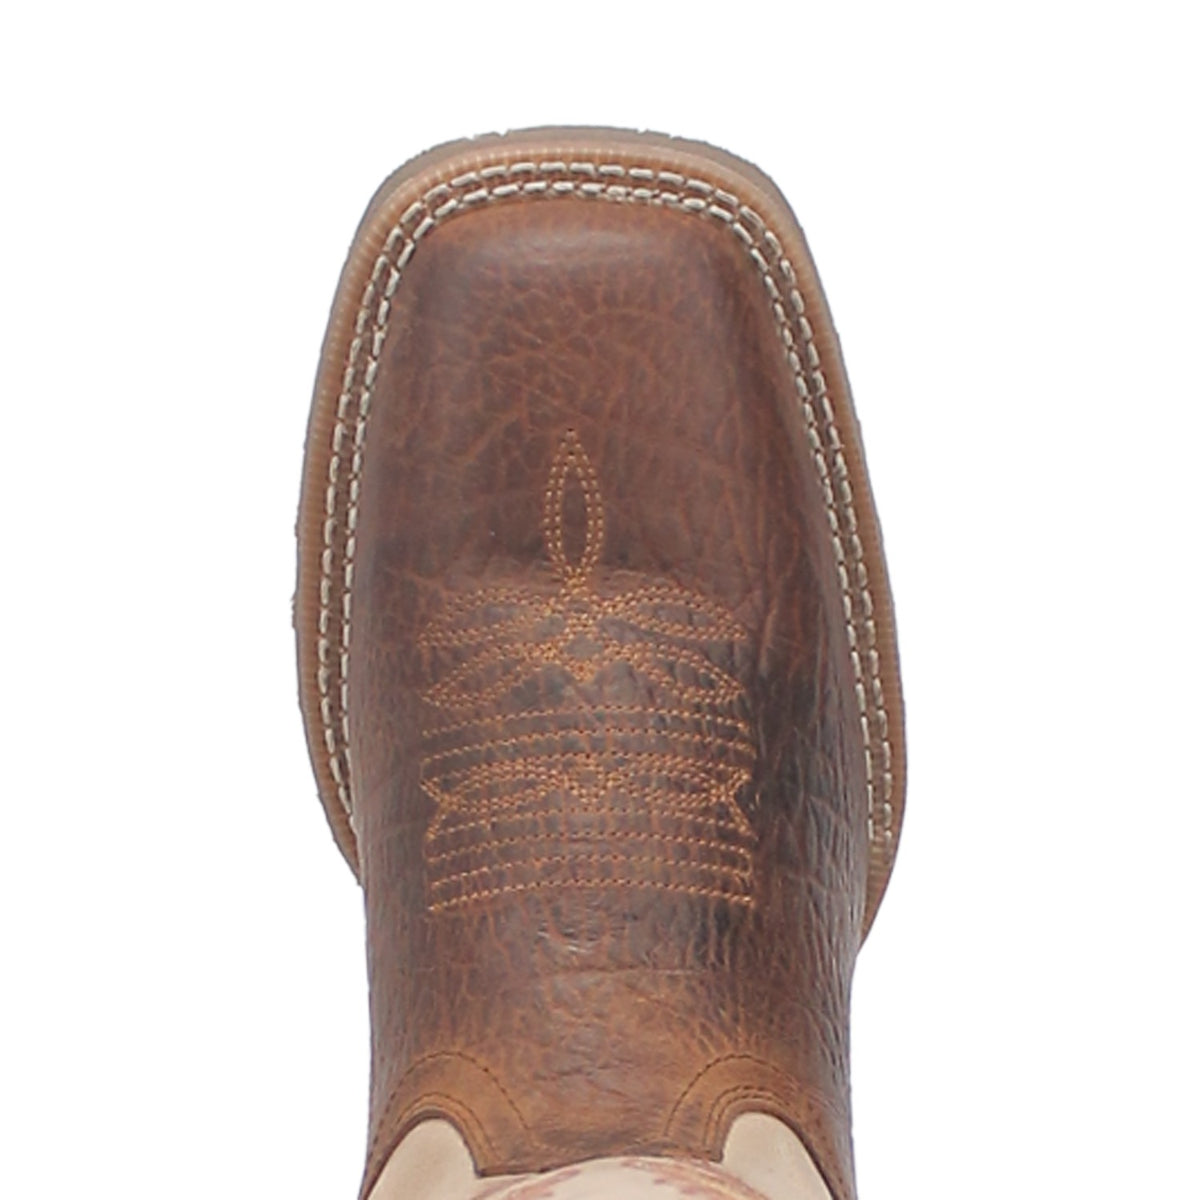 PEETE LEATHER BOOT Cover